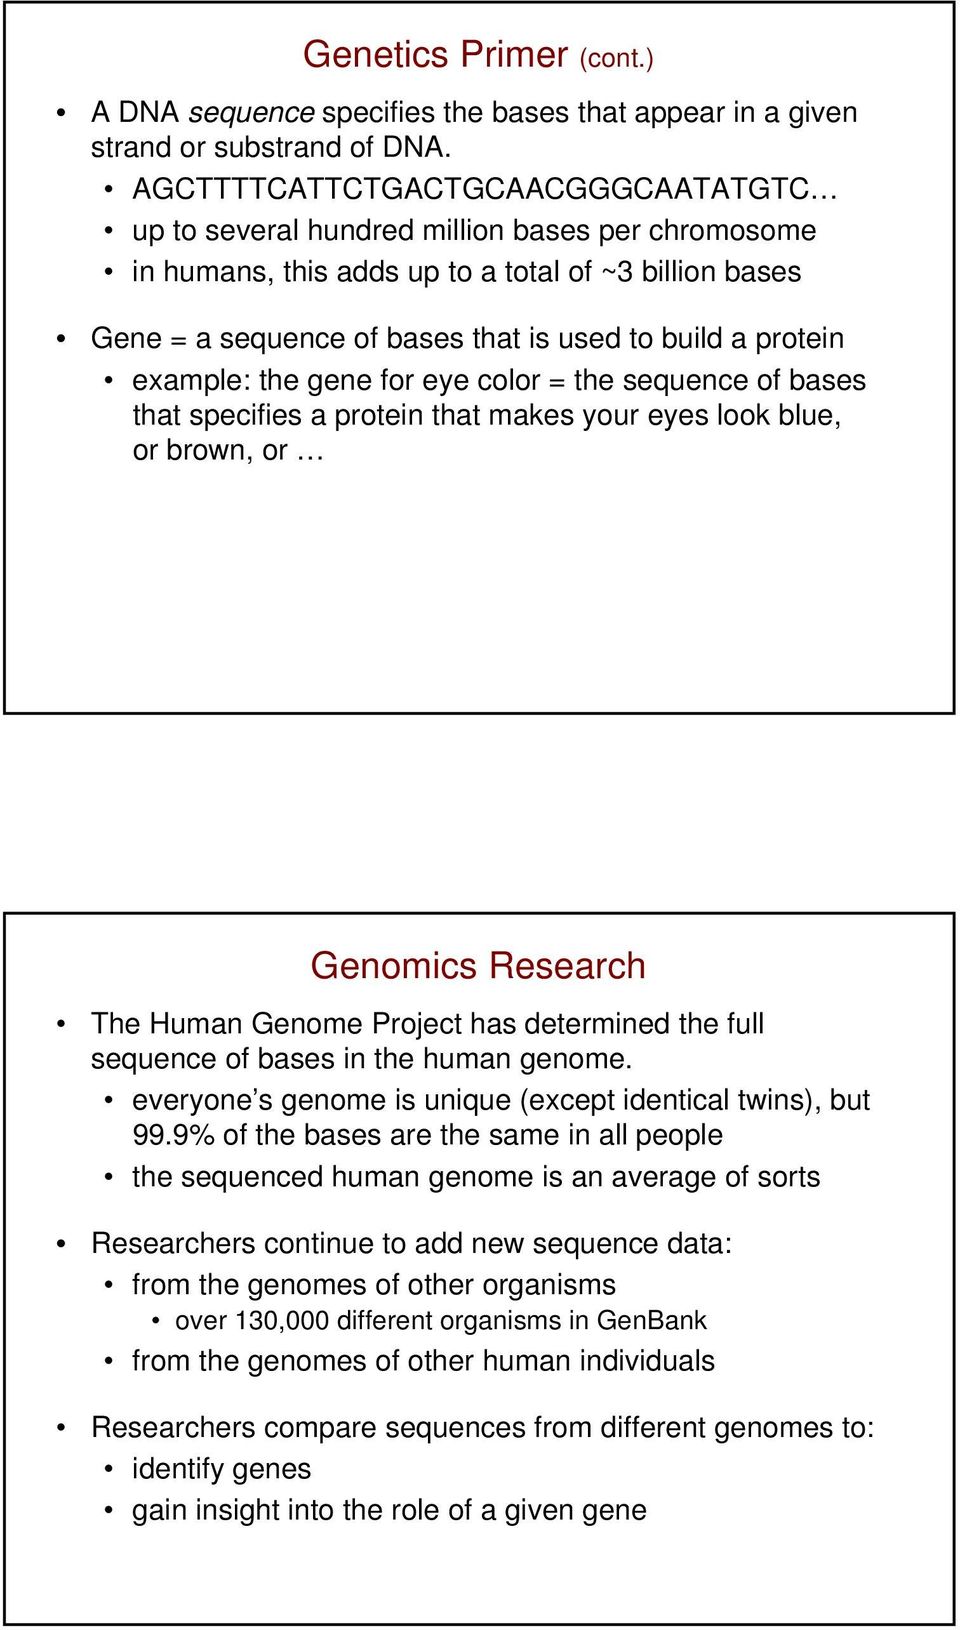 example: the gene for eye color = the sequence of bases that specifies a protein that makes your eyes look blue, or brown, or Genomics Research The Human Genome Project has determined the full